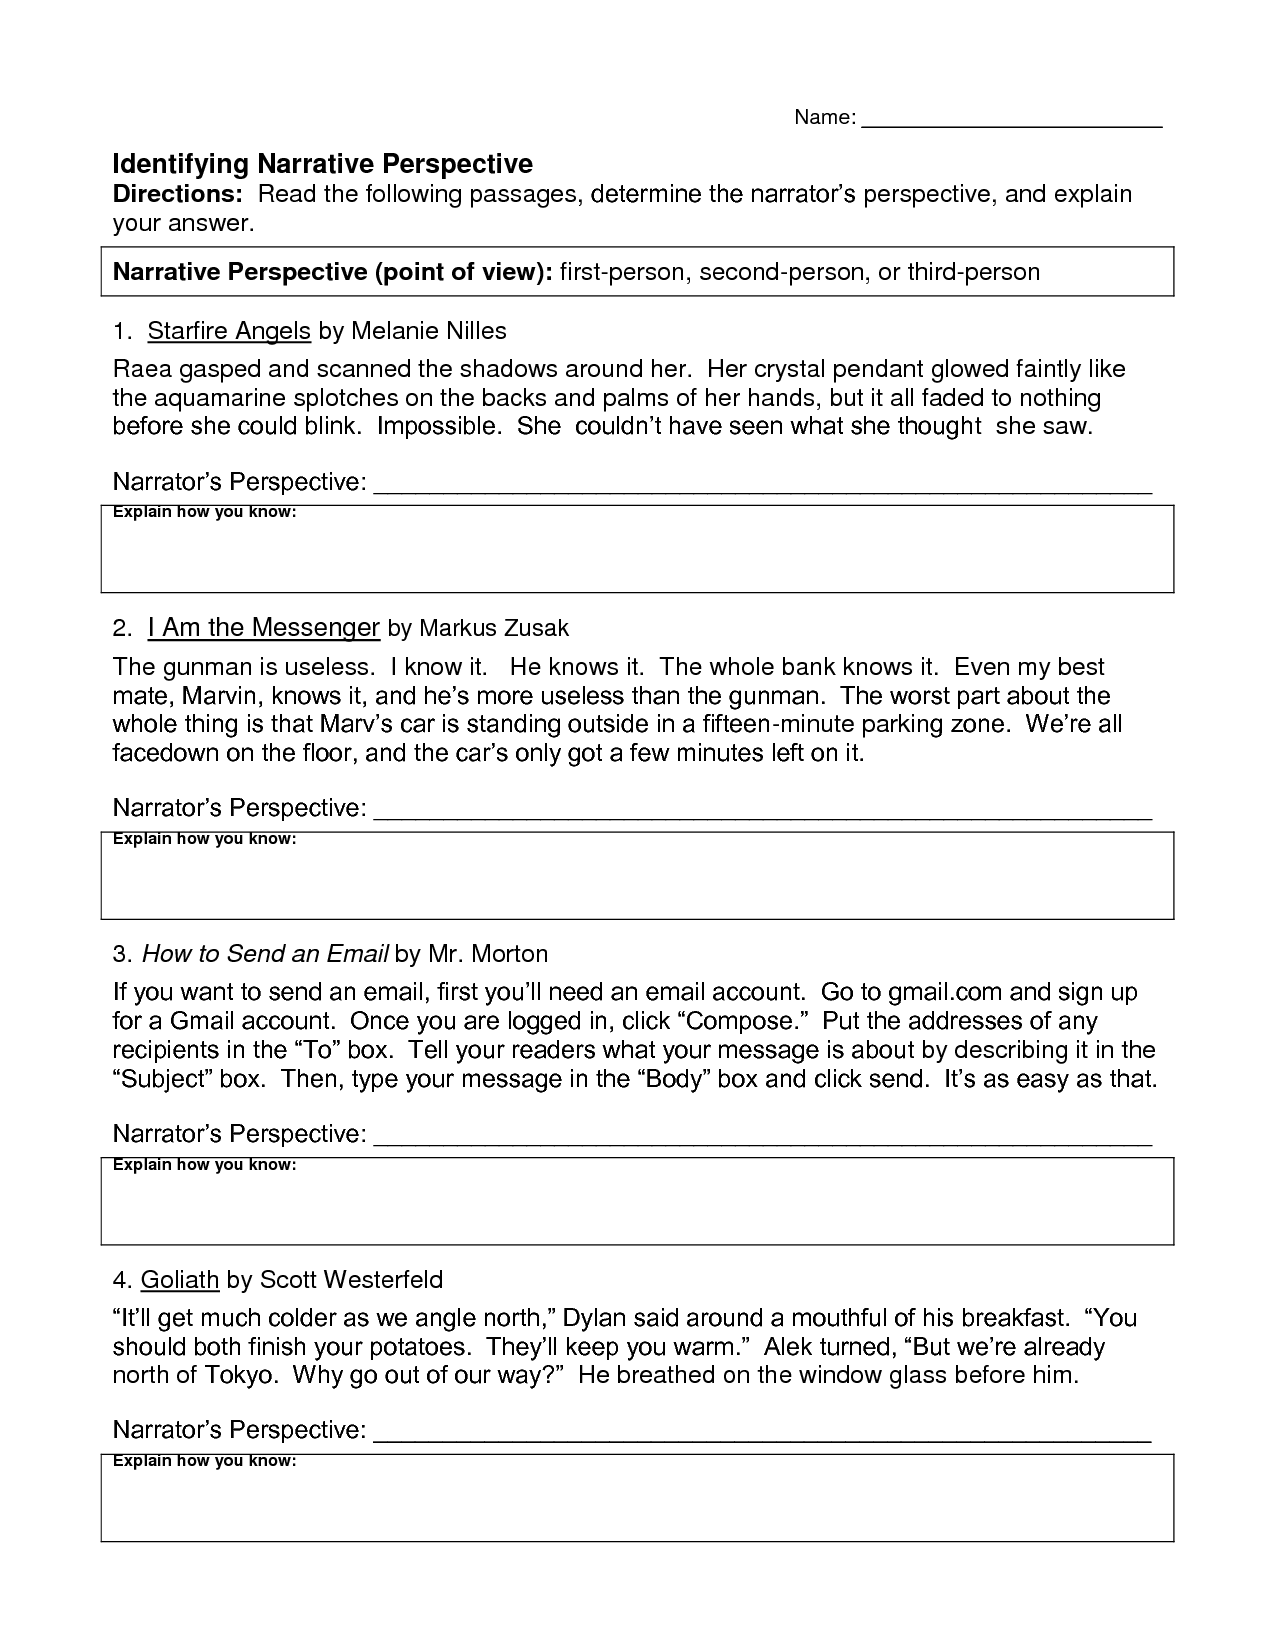 17-best-images-of-worksheets-first-second-third-third-person-point-of-view-worksheets-ordinal